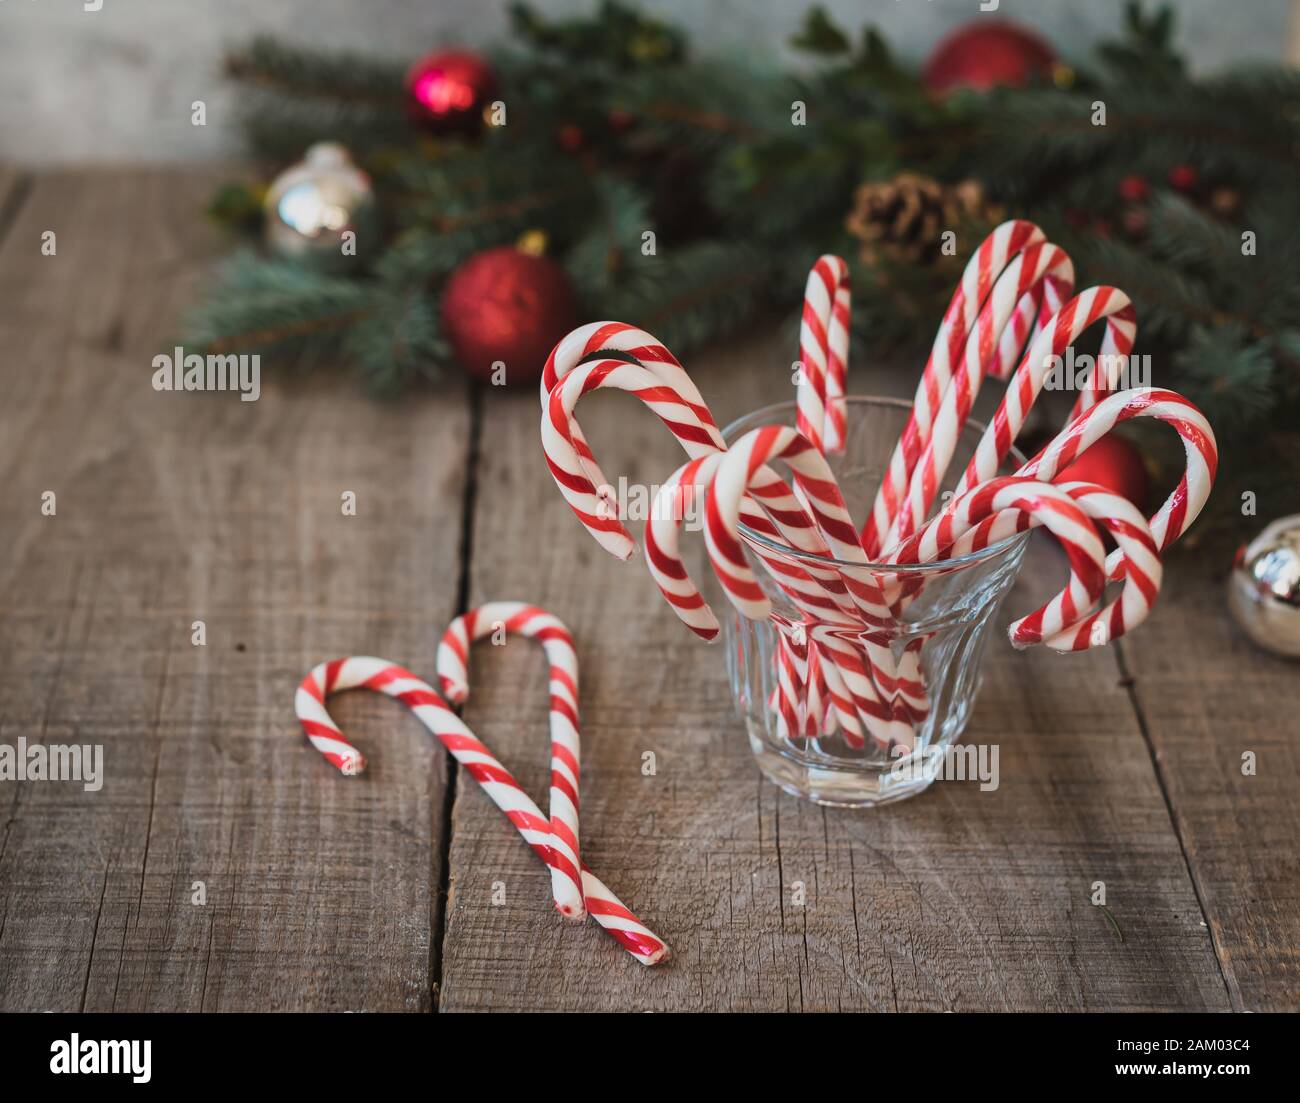 High angle shot of a glass of candy canes against Christmas backdrop. Stock Photo